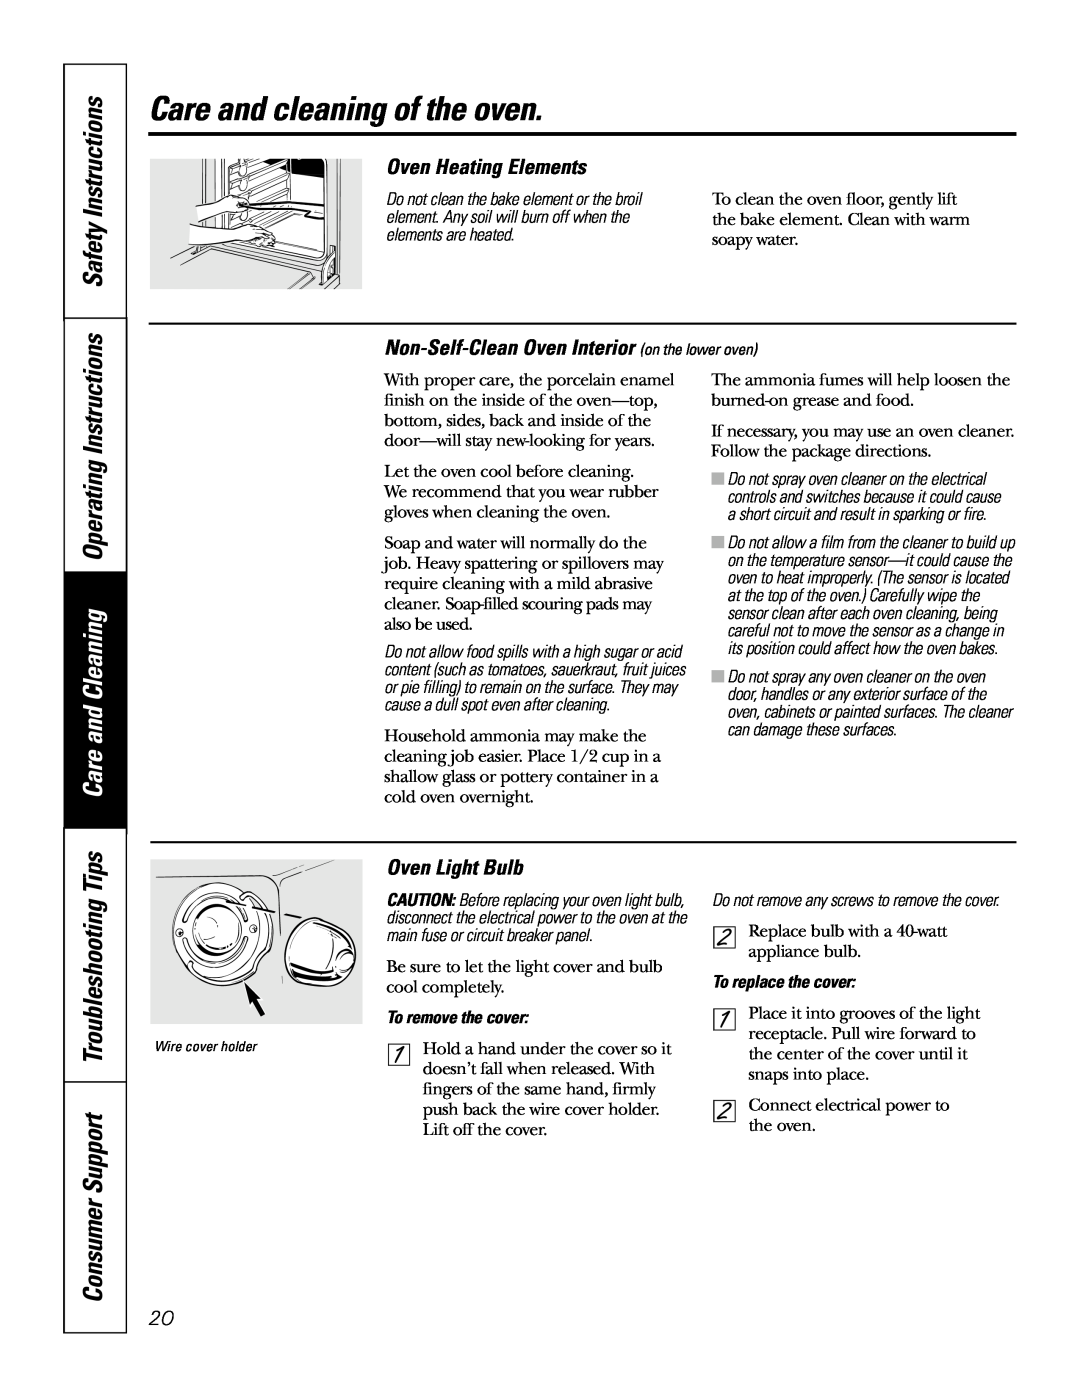 GE JRP 28 Consumer Support Troubleshooting Tips, Care and Cleaning Operating Instructions, Oven Heating Elements 